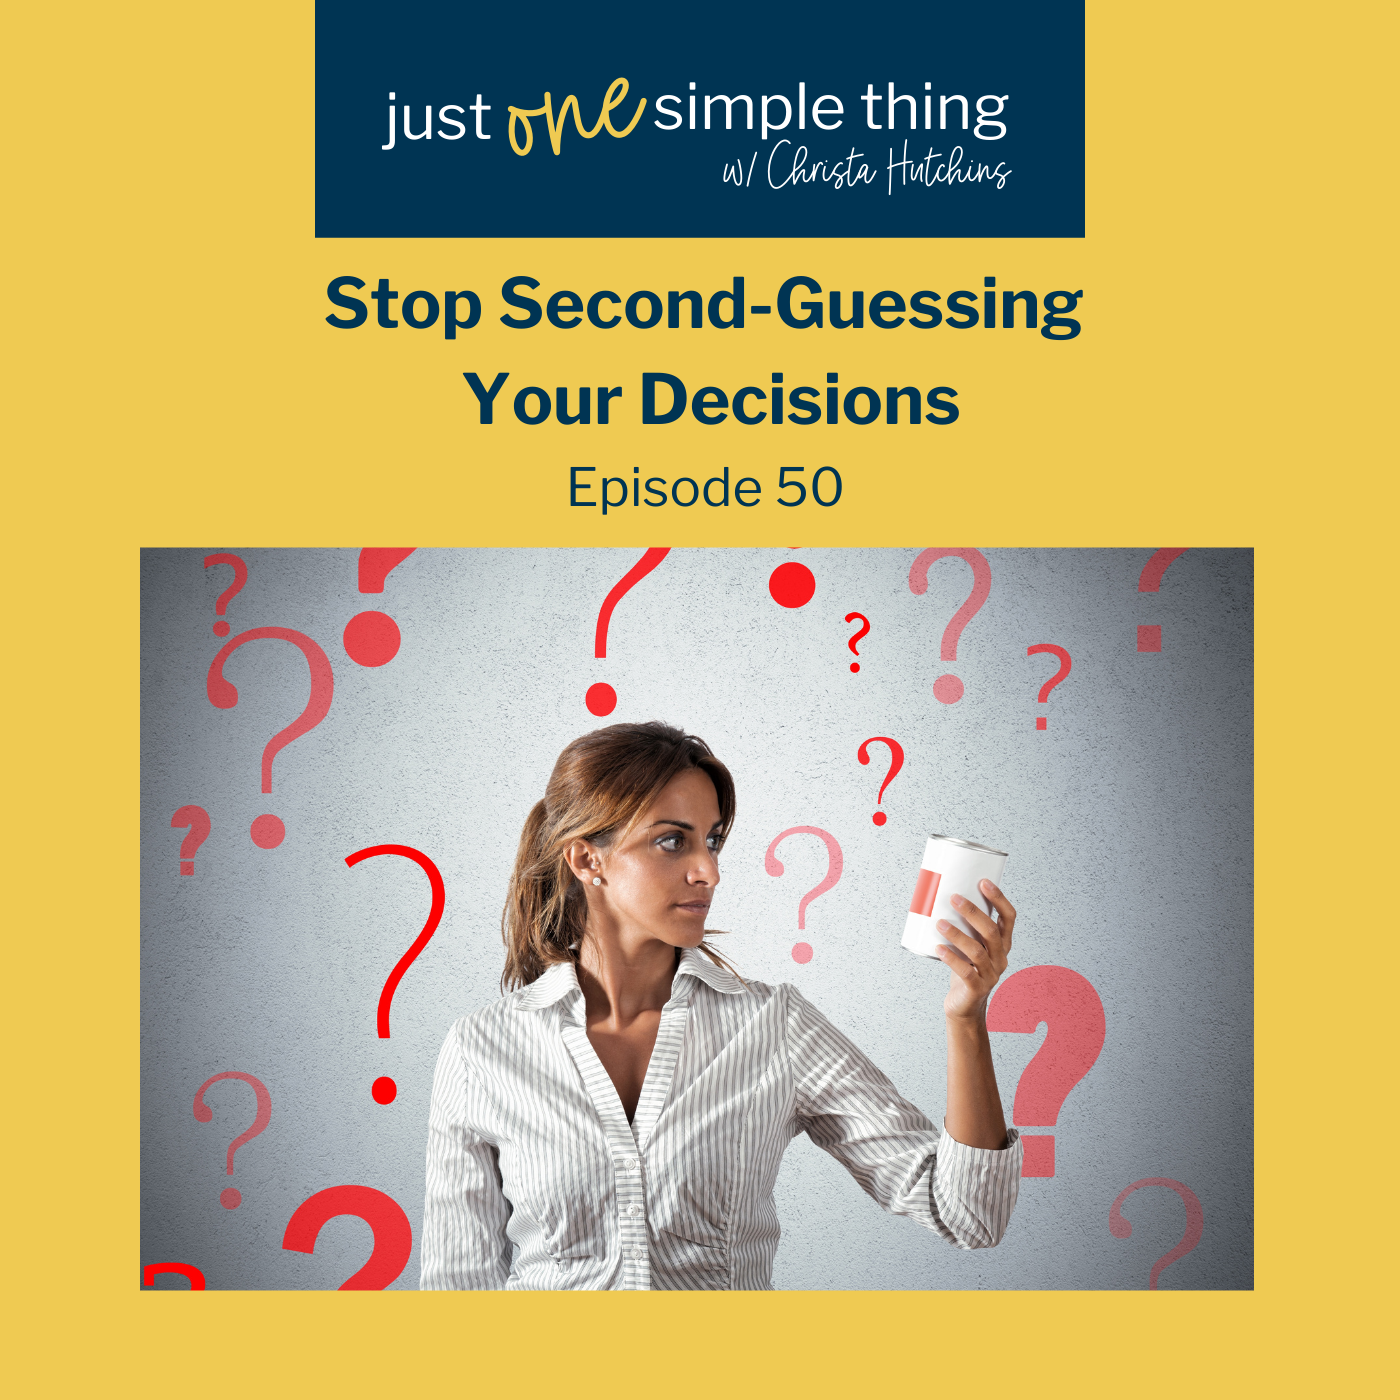 Stop Second-Guessing Your Decisions